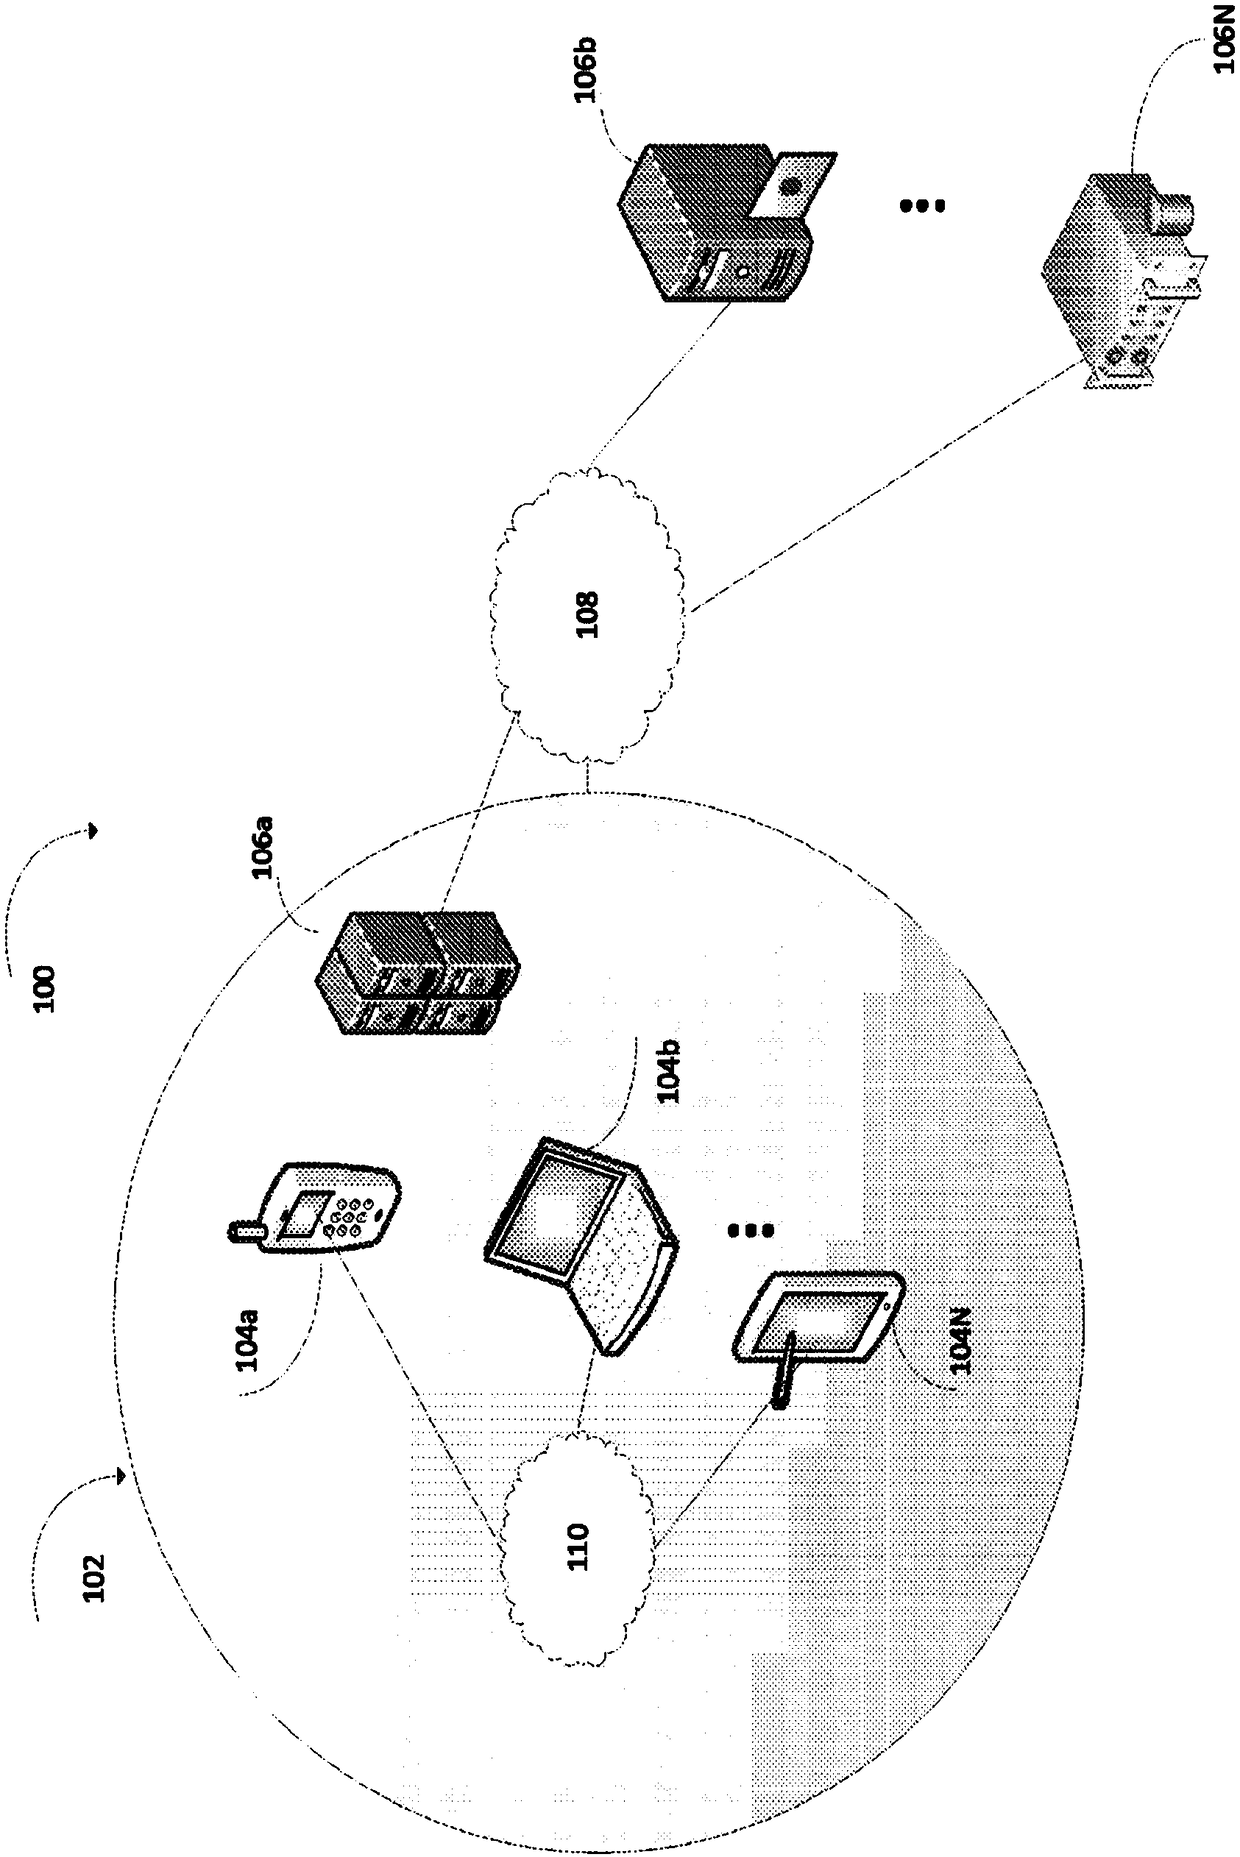 Peer-to-peer syncable storage system